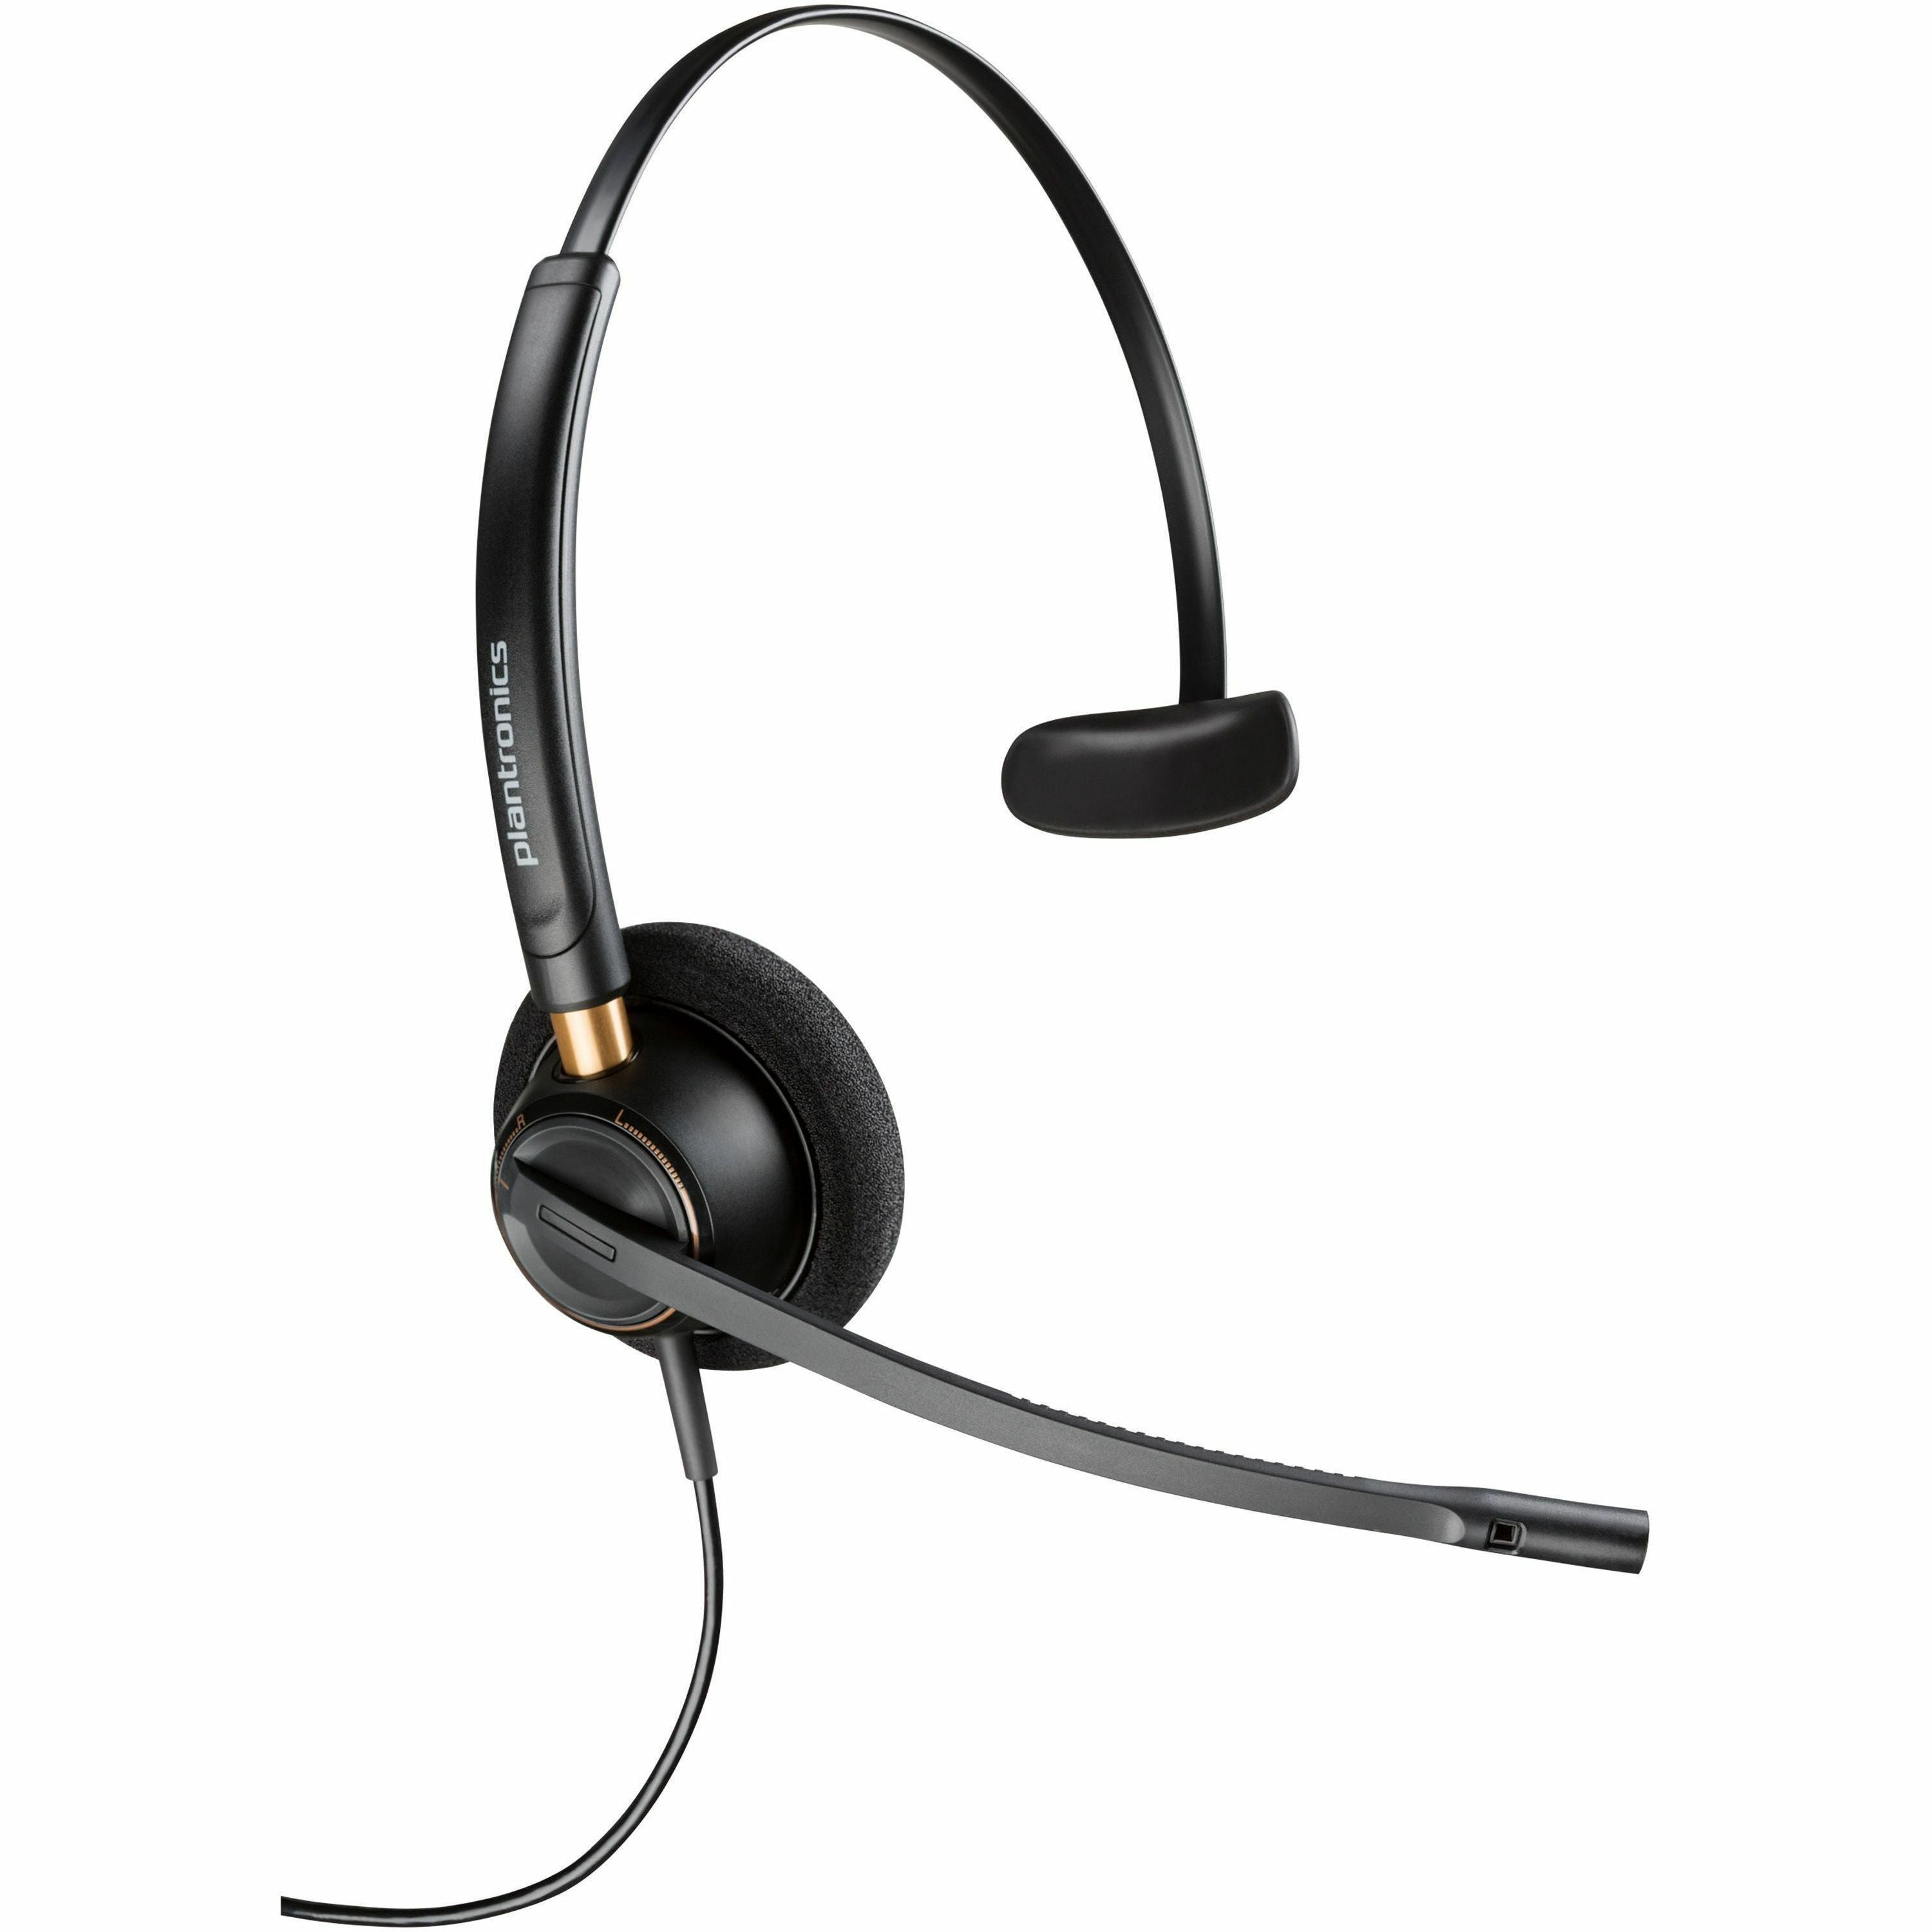 poly-encorepro-hw510-monoaural-headset-mono-mini-phone-35mm-wired-20-hz-16-khz-on-ear-monaural-ear-cup-258-ft-cable-omni-directional-noise-cancelling-microphone-black_hew783q1aa - 1